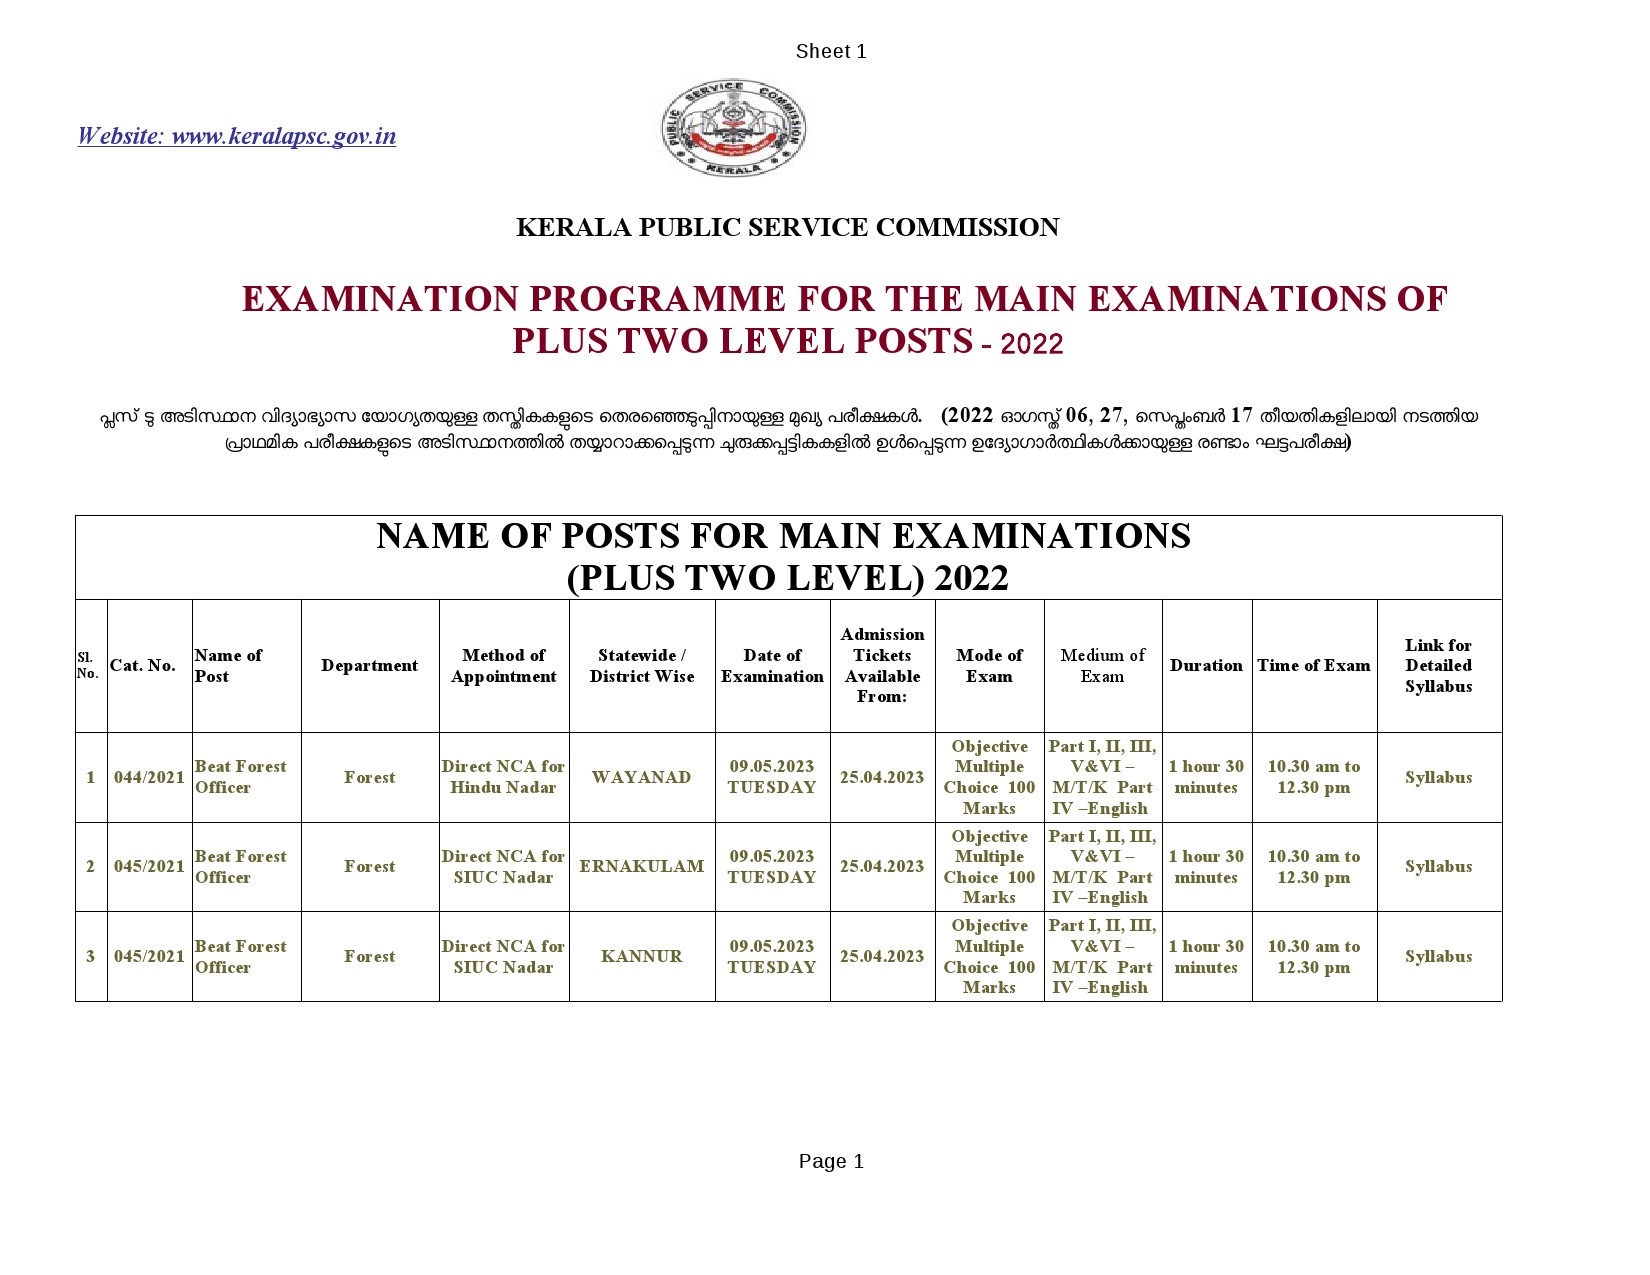 Plus Two Level Main Examination Programme For The Posts 2022 - Notification Image 1